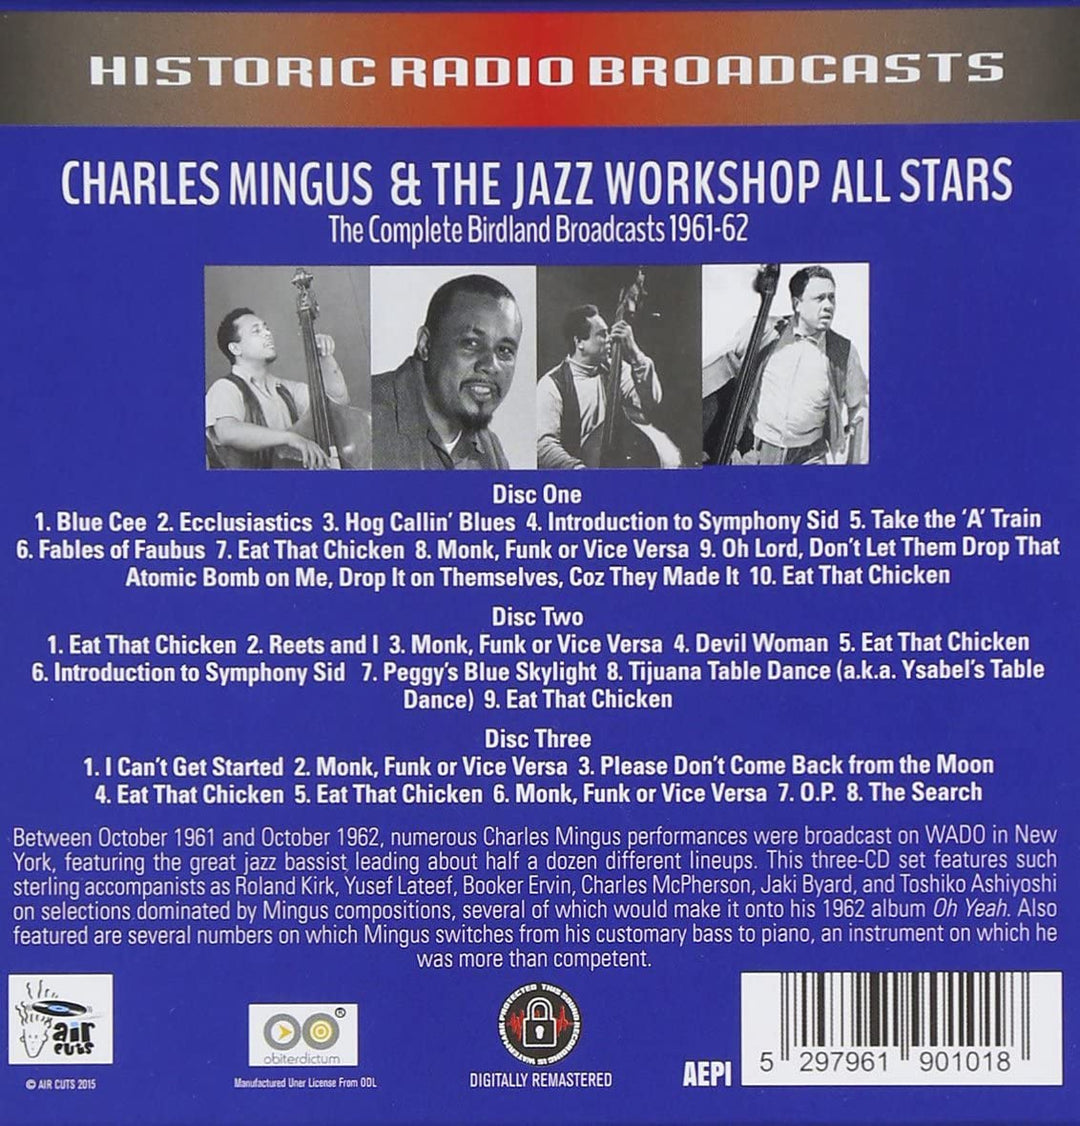 The Complete Birdland Broadcasts 1961-62 - Charles Mingus and The Jazz Workshop All Stars [Audio CD]